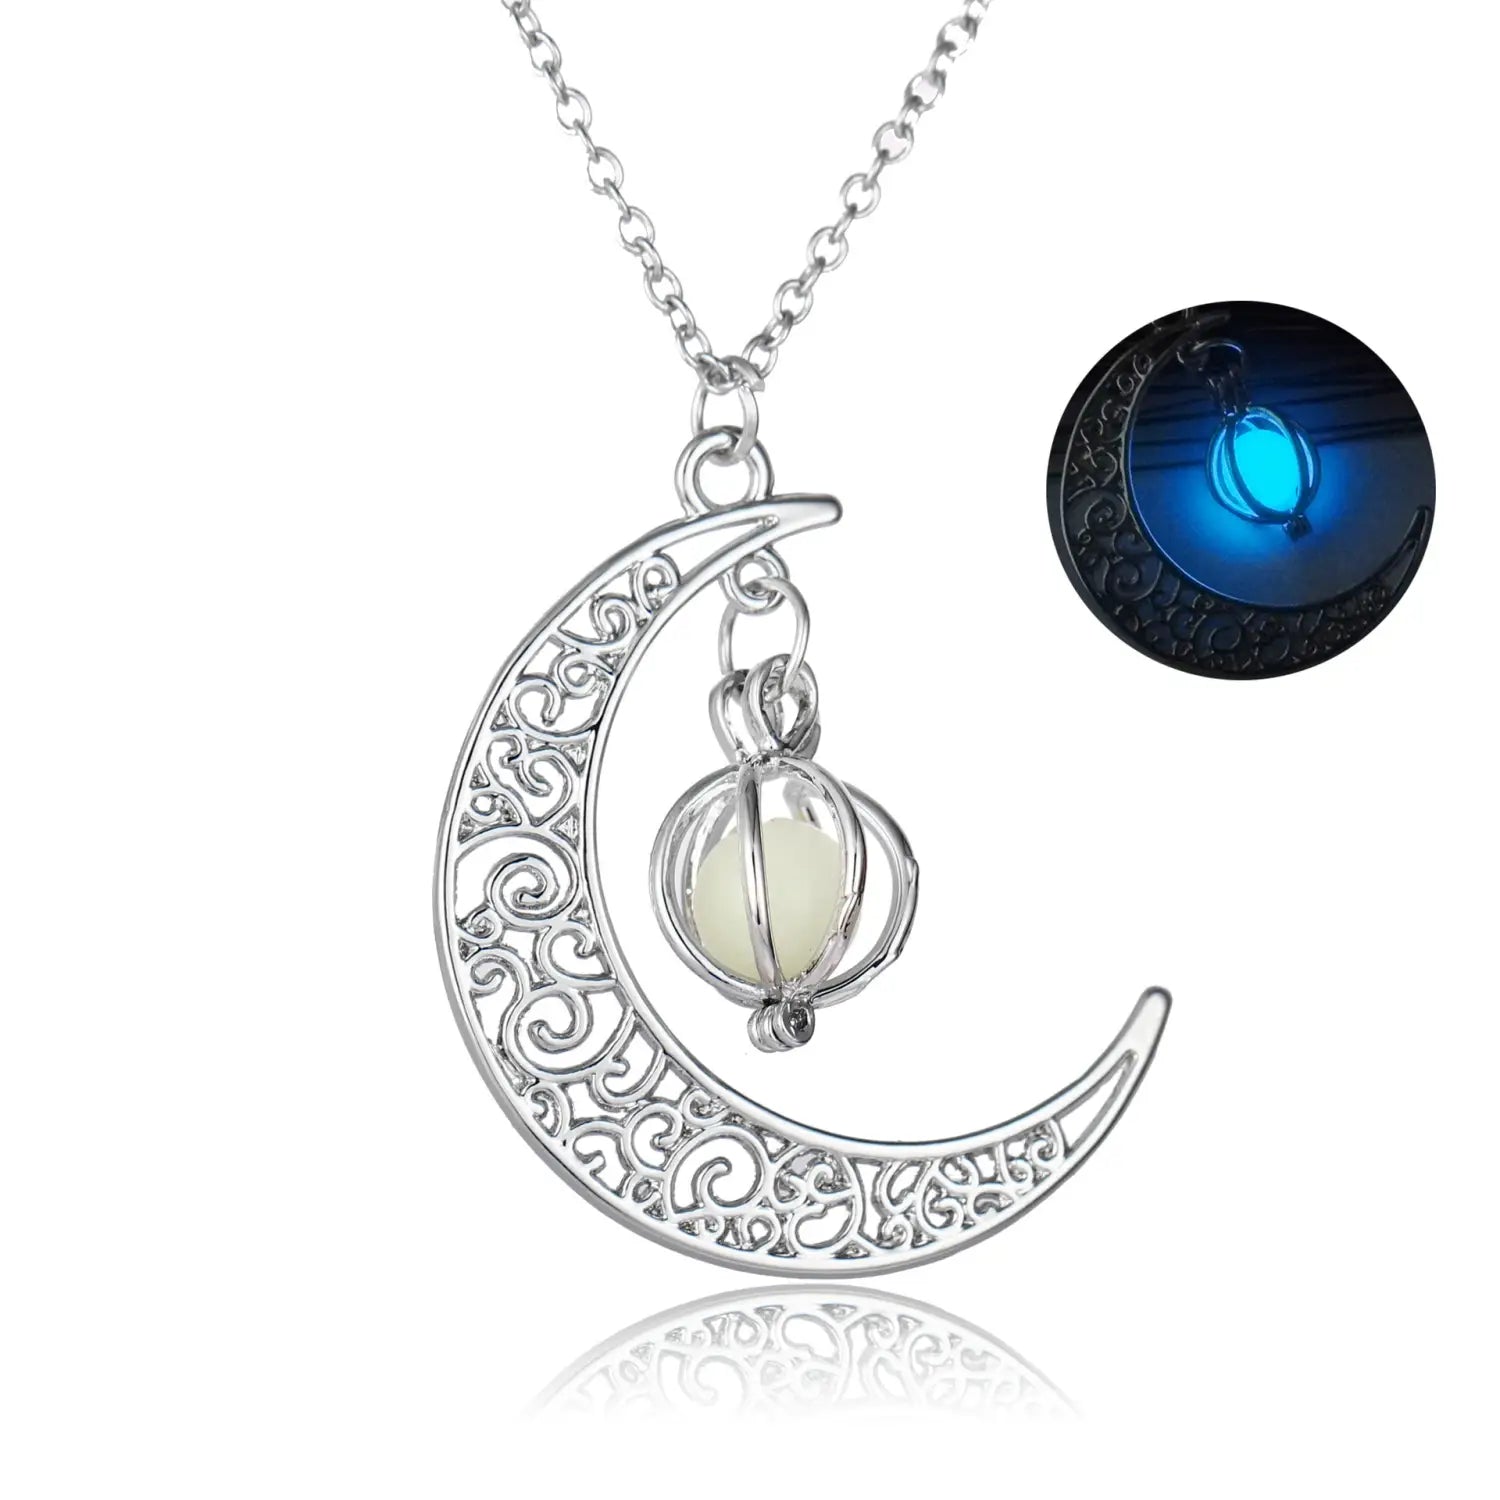 Glowing Moon Stone Necklace